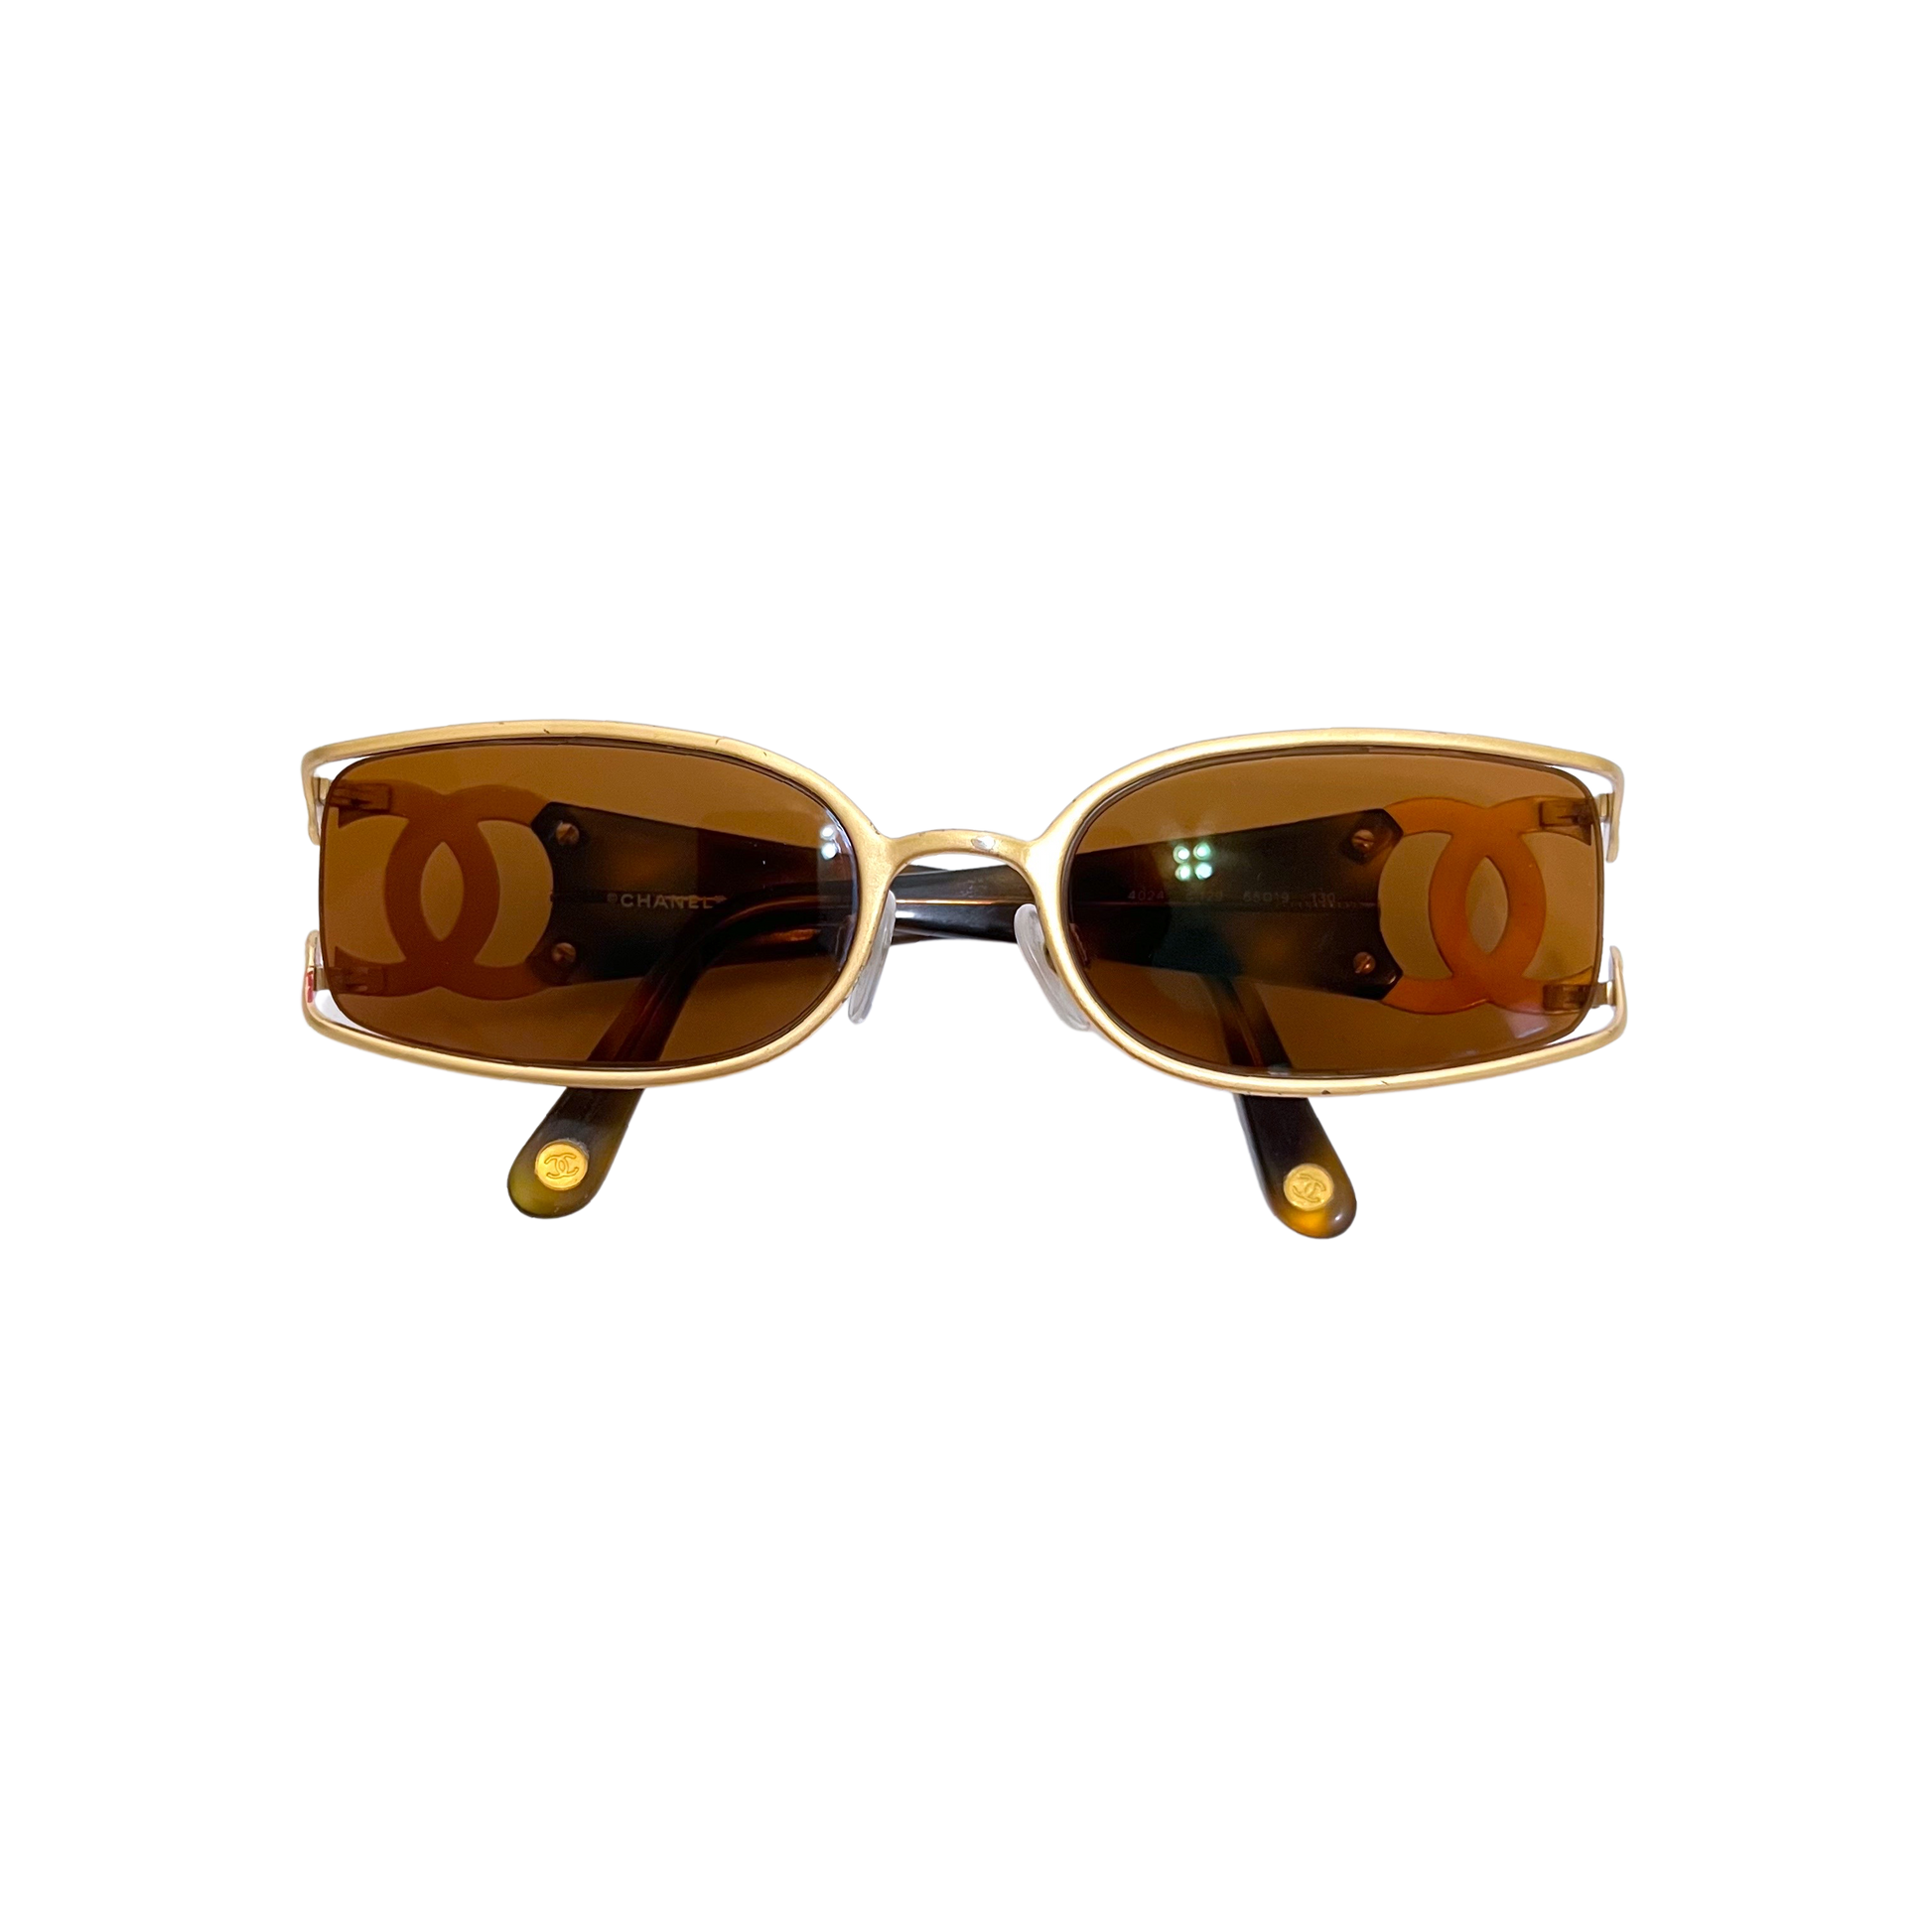 CHANEL 5124 A Sunglasses 59-17 Brown Gold Plastic Women's Made in Italy 384